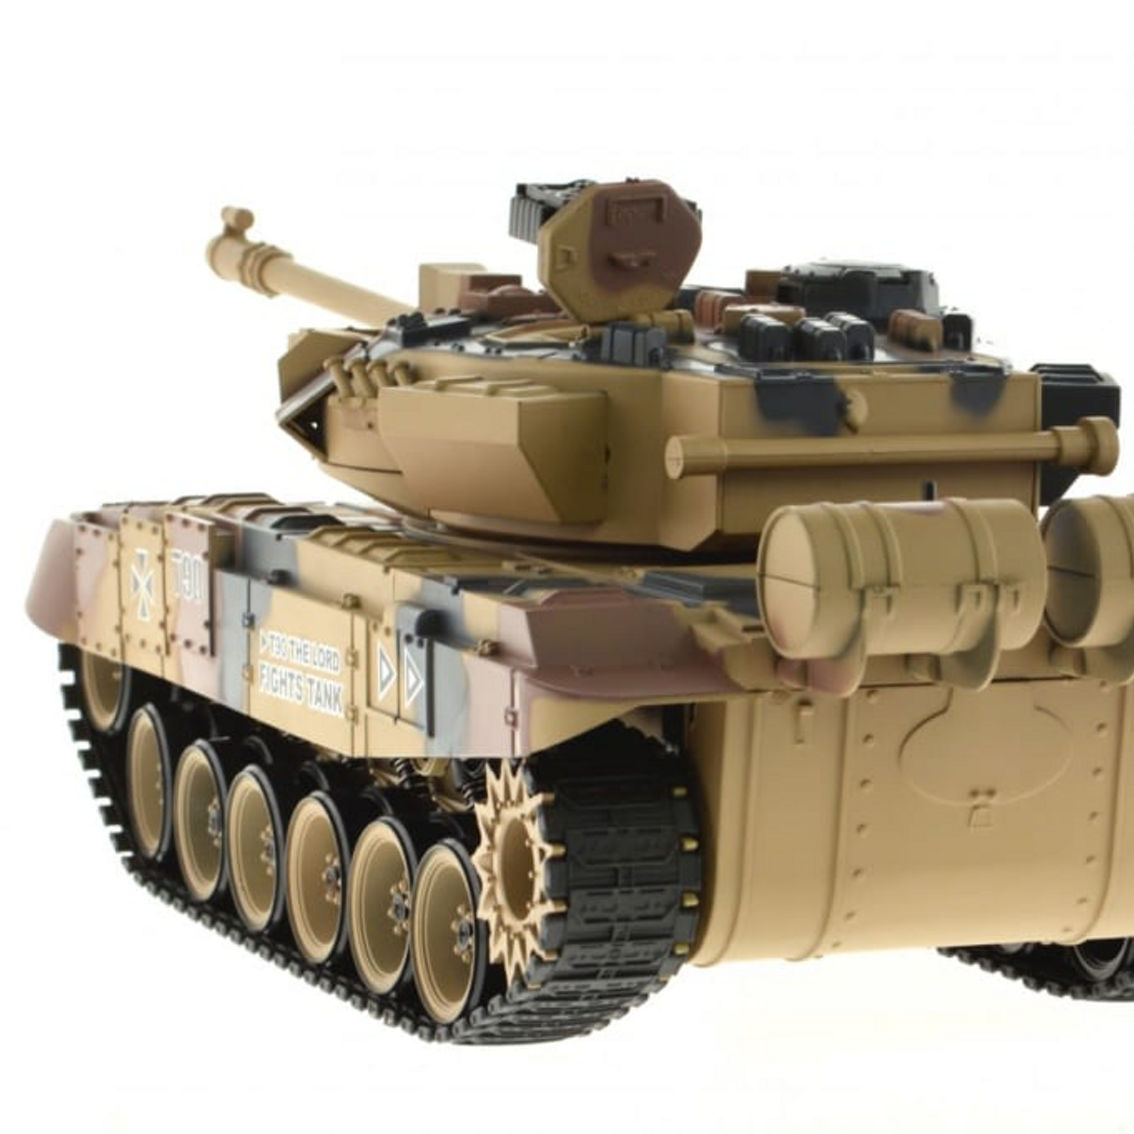 CIS-YZ-819 1:18 scale Russian T90 Camo tank with lights sound and BB gun - Image 4 of 5